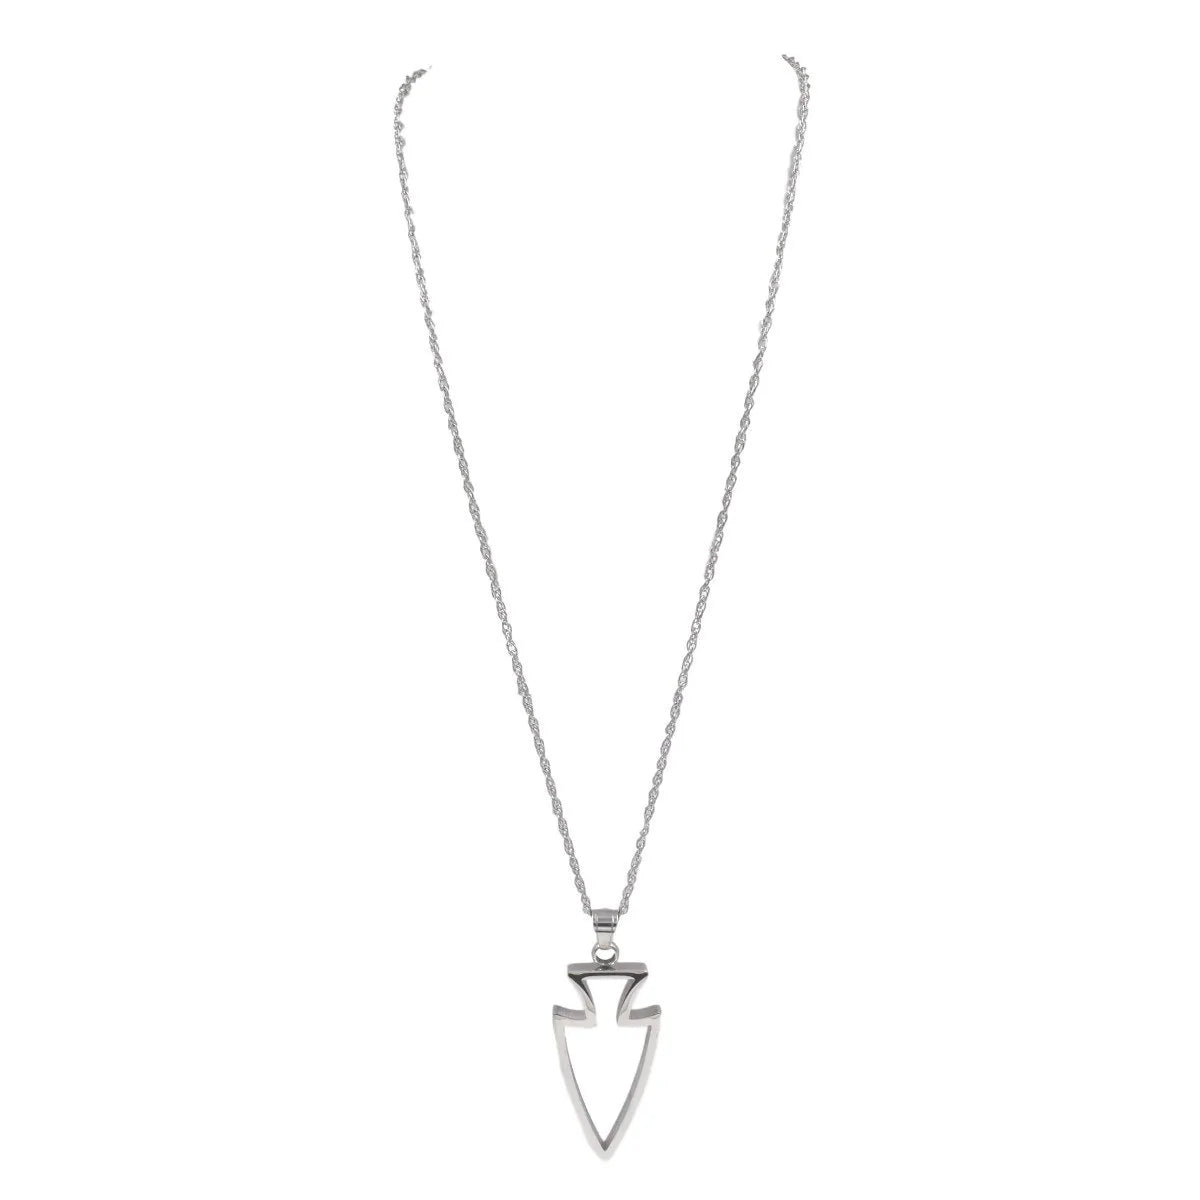 Silver Arrowhead Necklace - 32 Inches